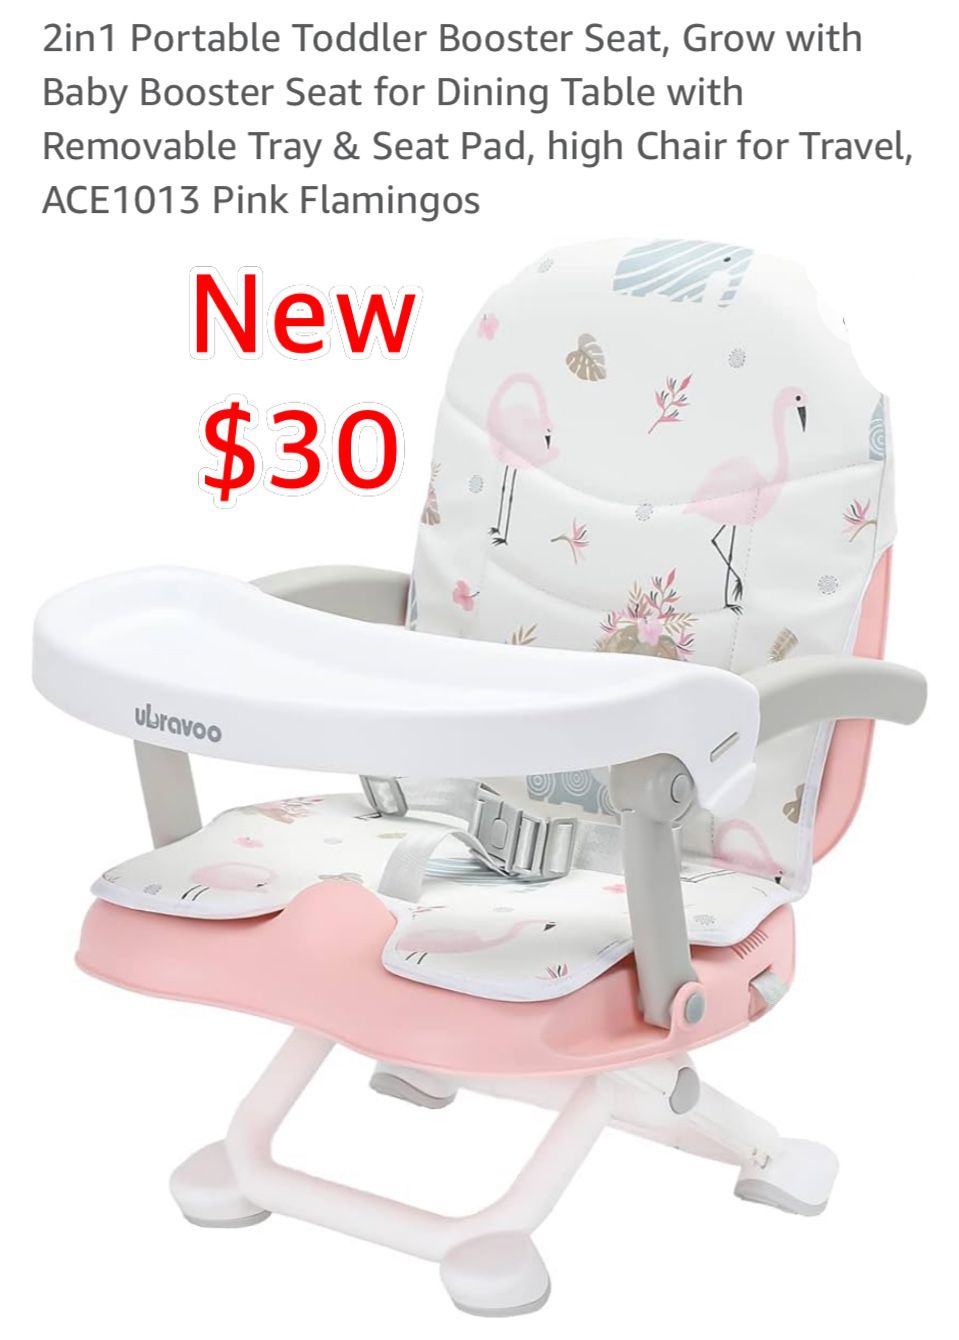 New 2in1 Portable Toddler Booster Seat, Grow with Baby Booster Seat for Dining Table with Removable Tray & Seat Pad, high Chair ,  Pink Flamingos $30